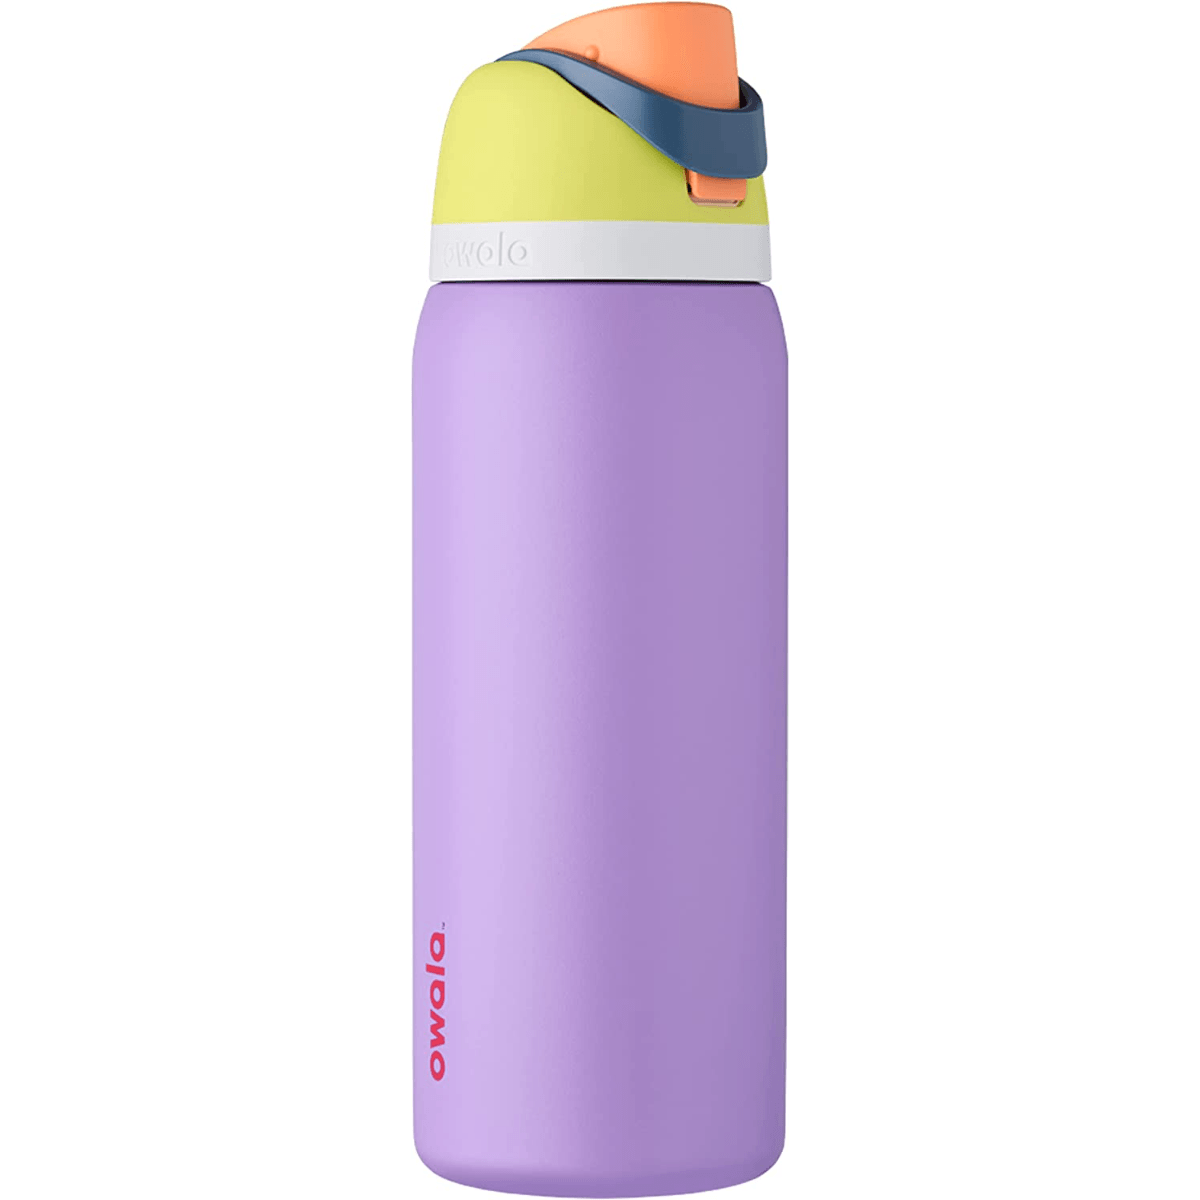 Owala Flip Insulated Stainless Steel Water Bottle with Straw and Locking  Lid for Sports and Travel, BPA-Free, 32-Ounce, Very, Very Dark